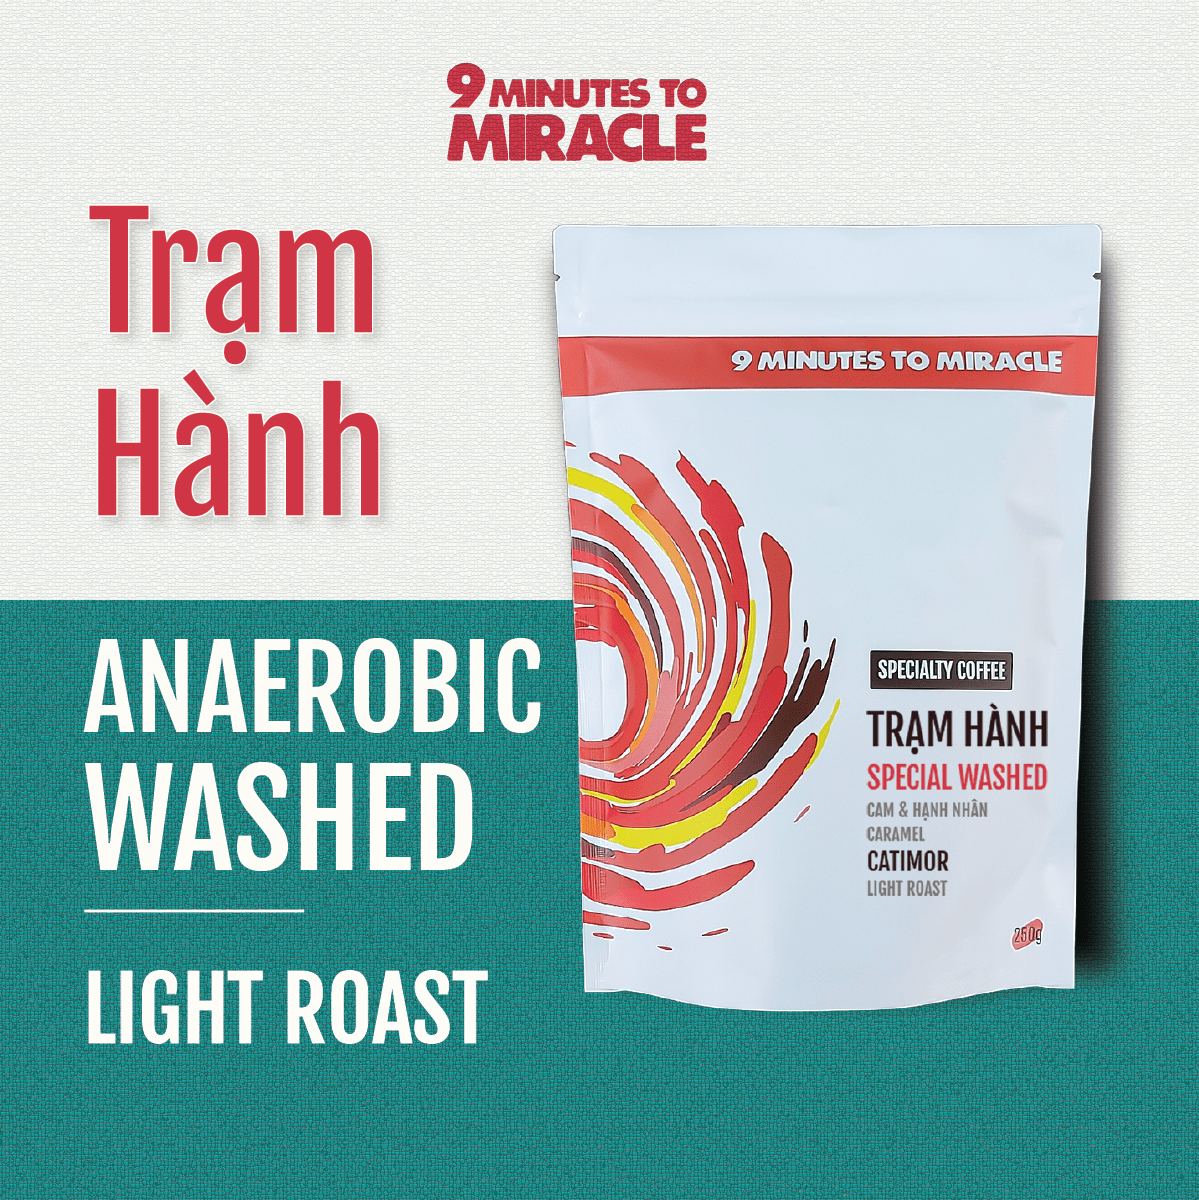 Tram Hanh Special Washed Specialty Coffee